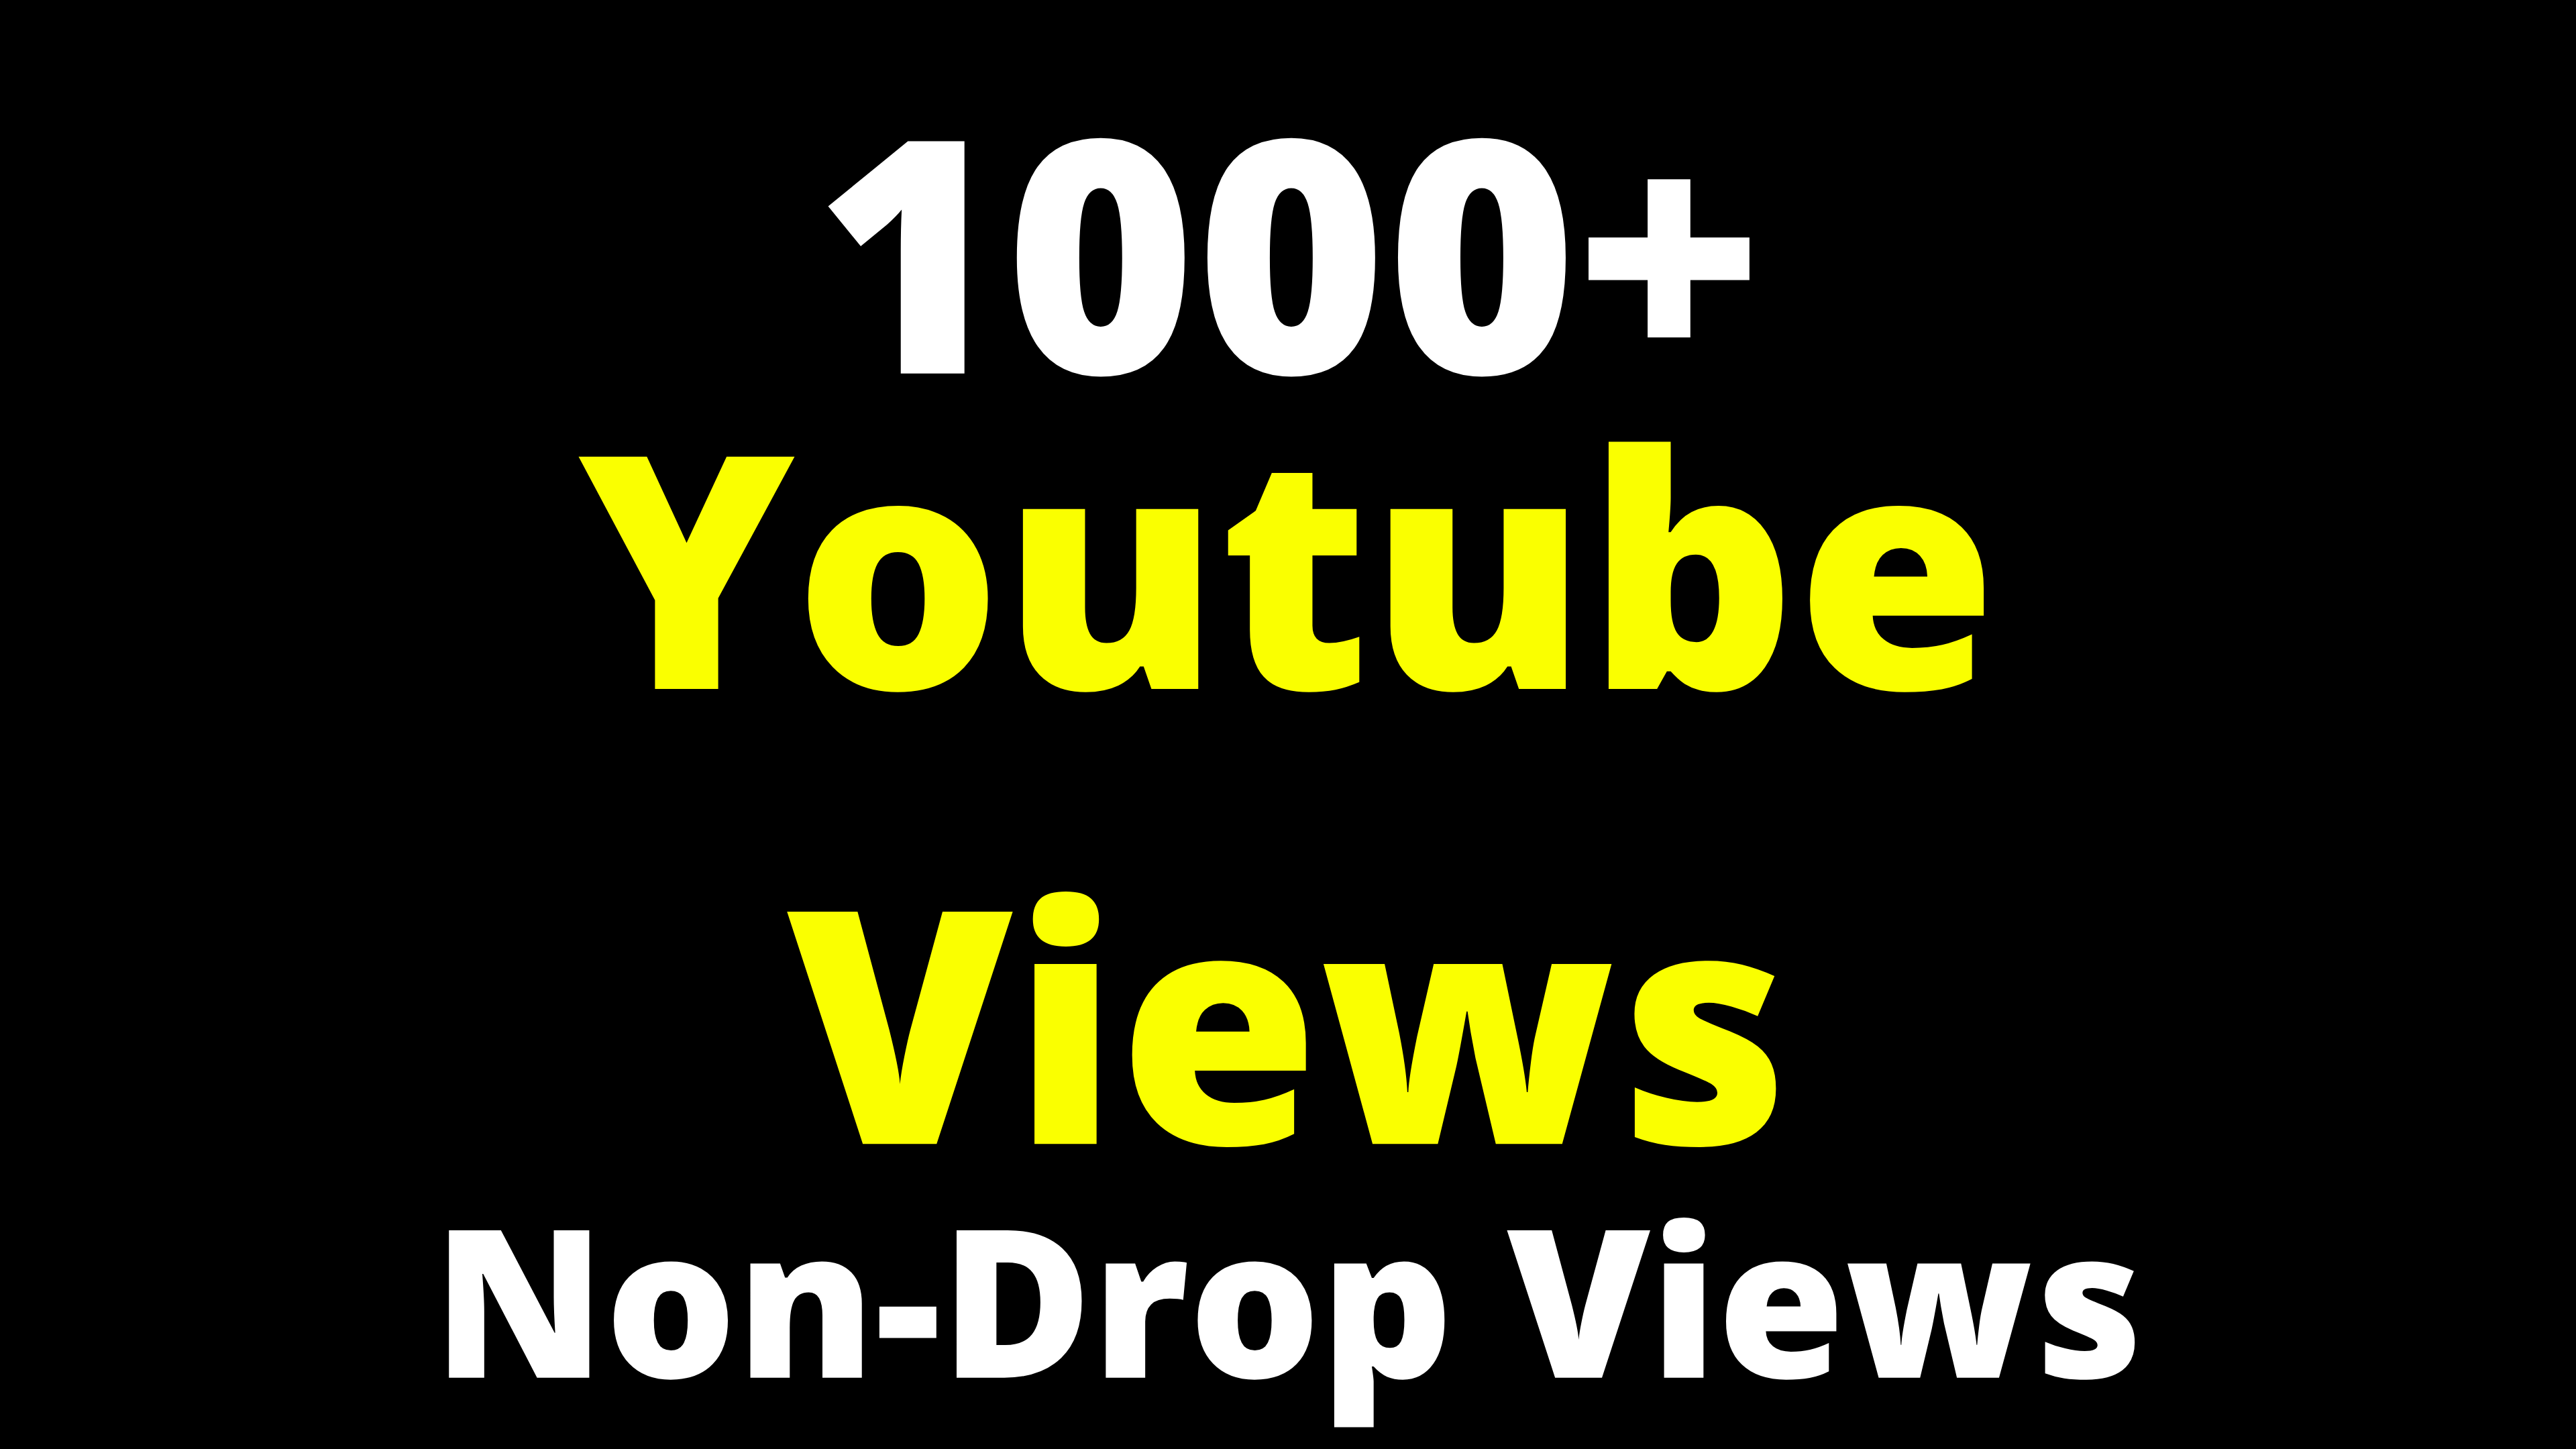 youtube real promotion on social media high quality 1000+ traffic